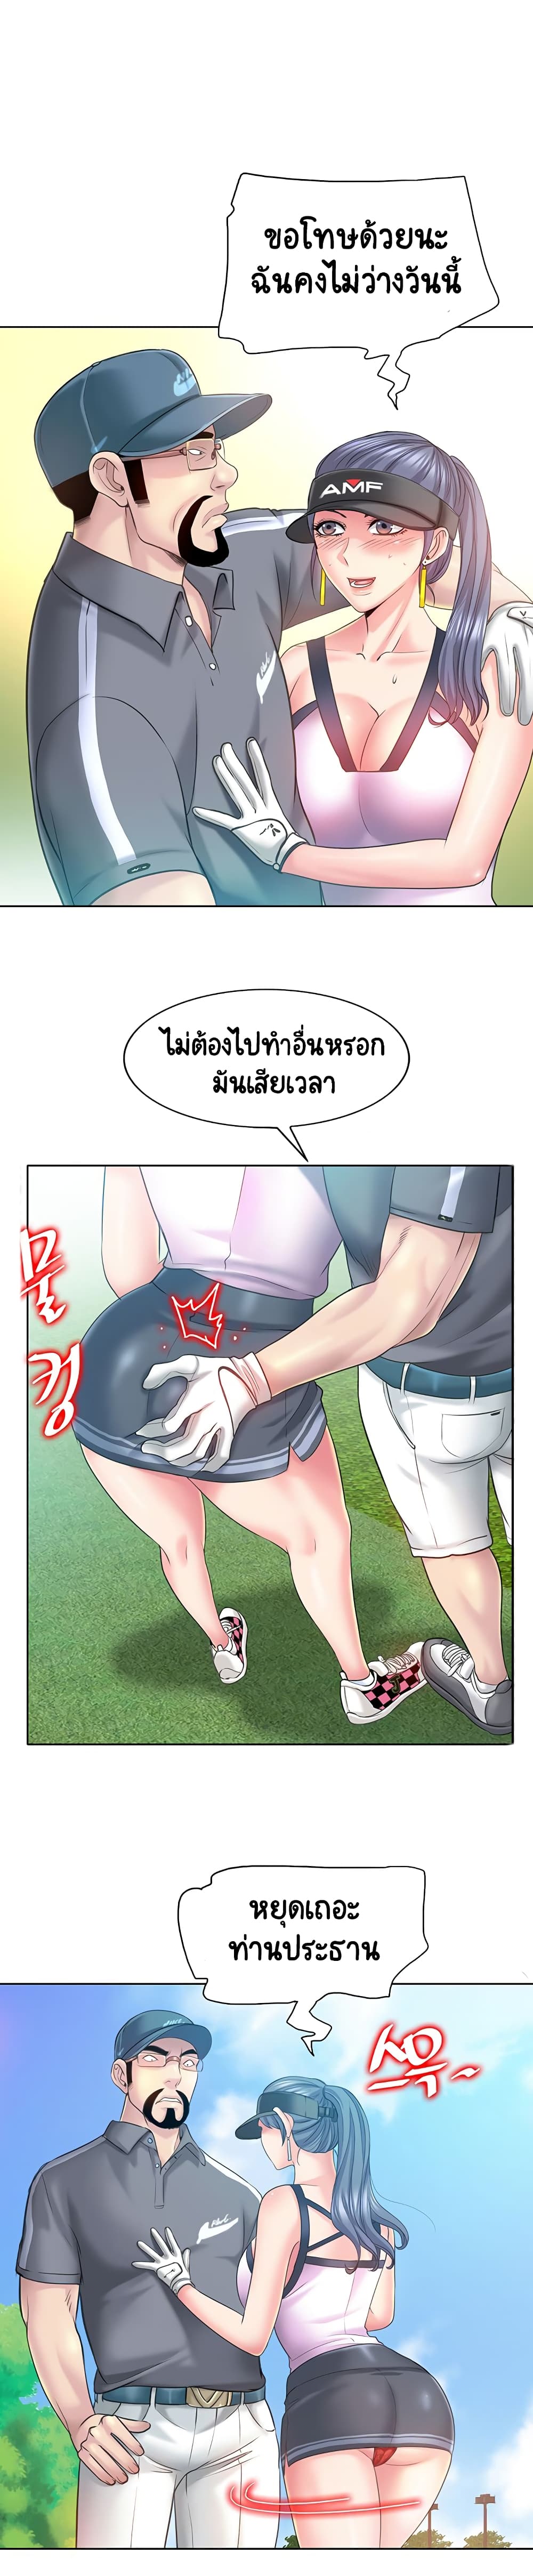 Hole In One 13 ภาพที่ 6